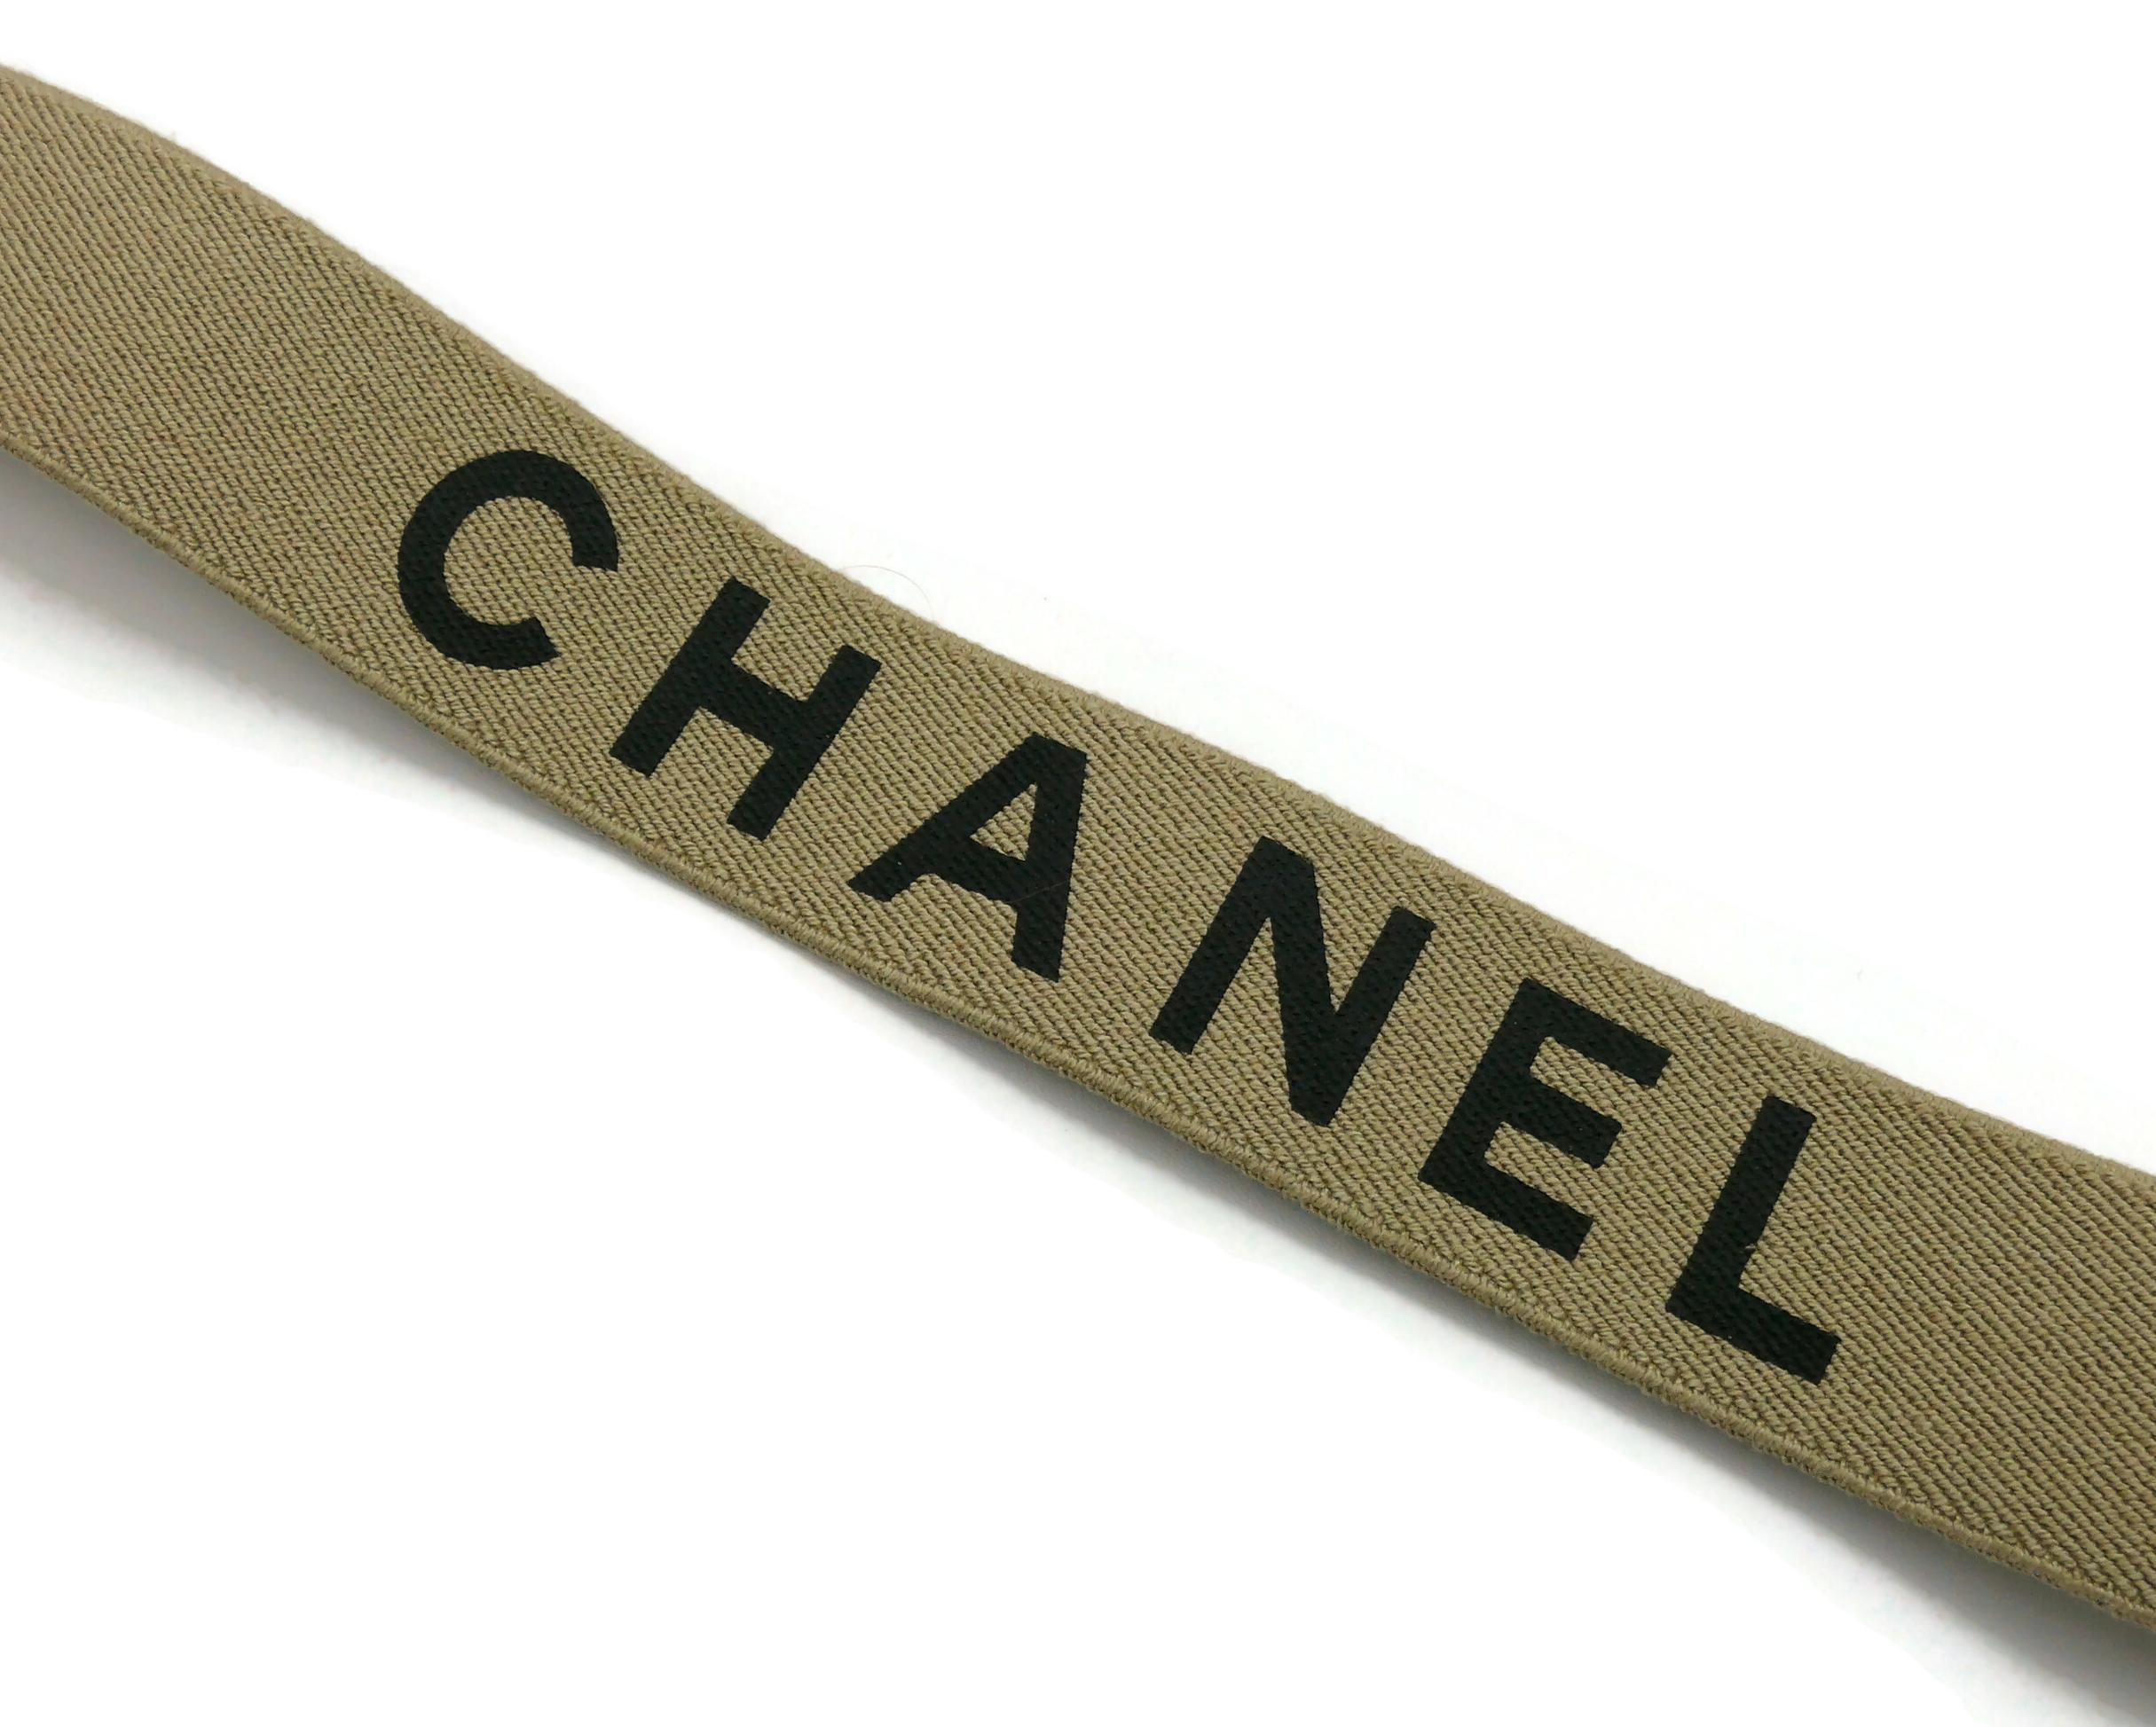 CHANEL by KARL LAGERFELD Vintage Iconic Light Brown and Black Suspenders, 1994 im Angebot 1